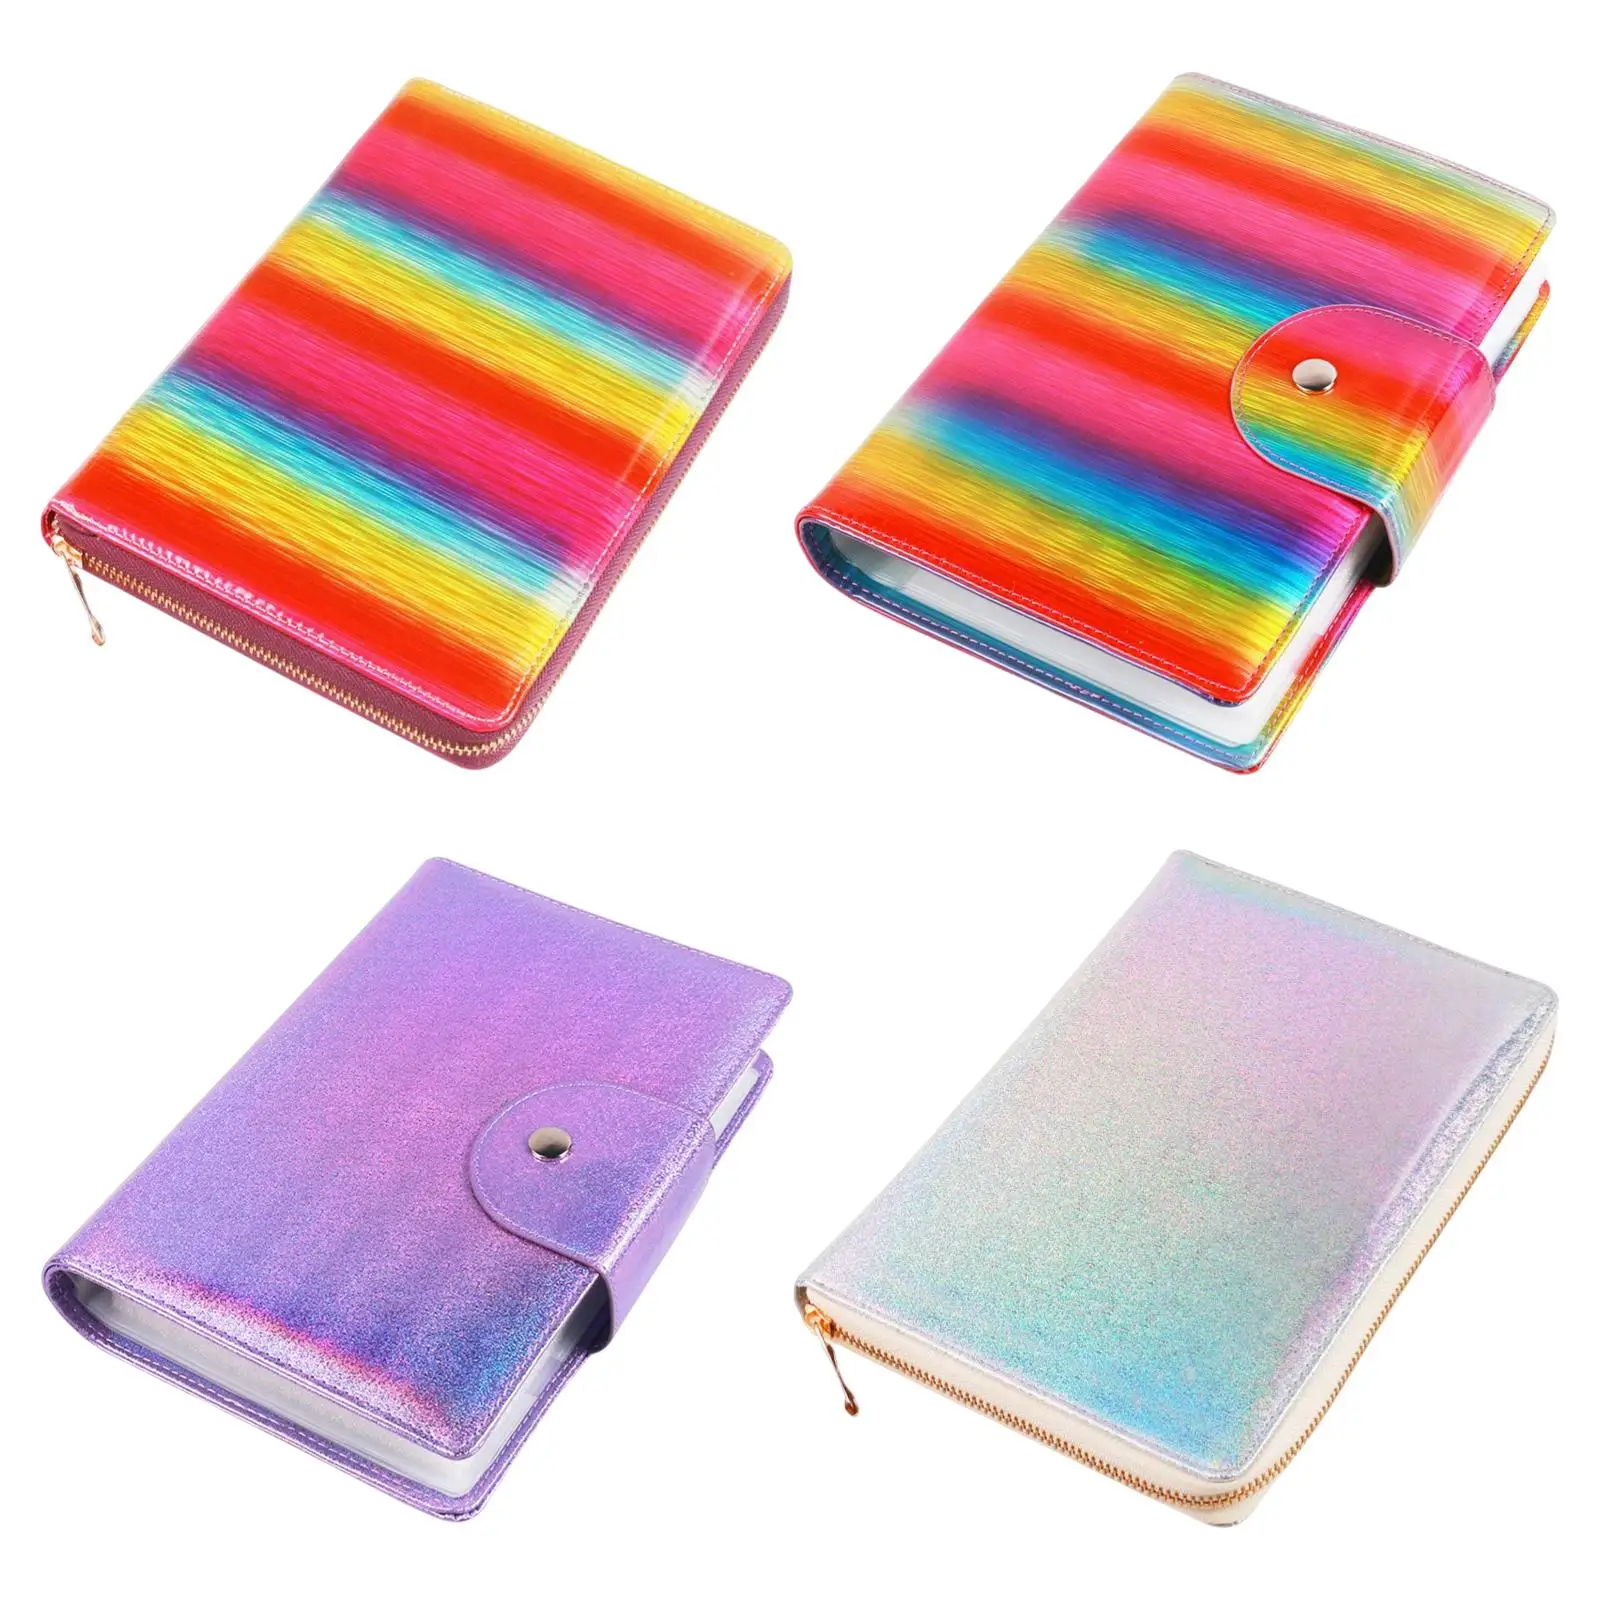 Nail Template Case Style Snap Close Rectangular Bag Printing Molds Collection Storage for Nail Art Plates Accessories